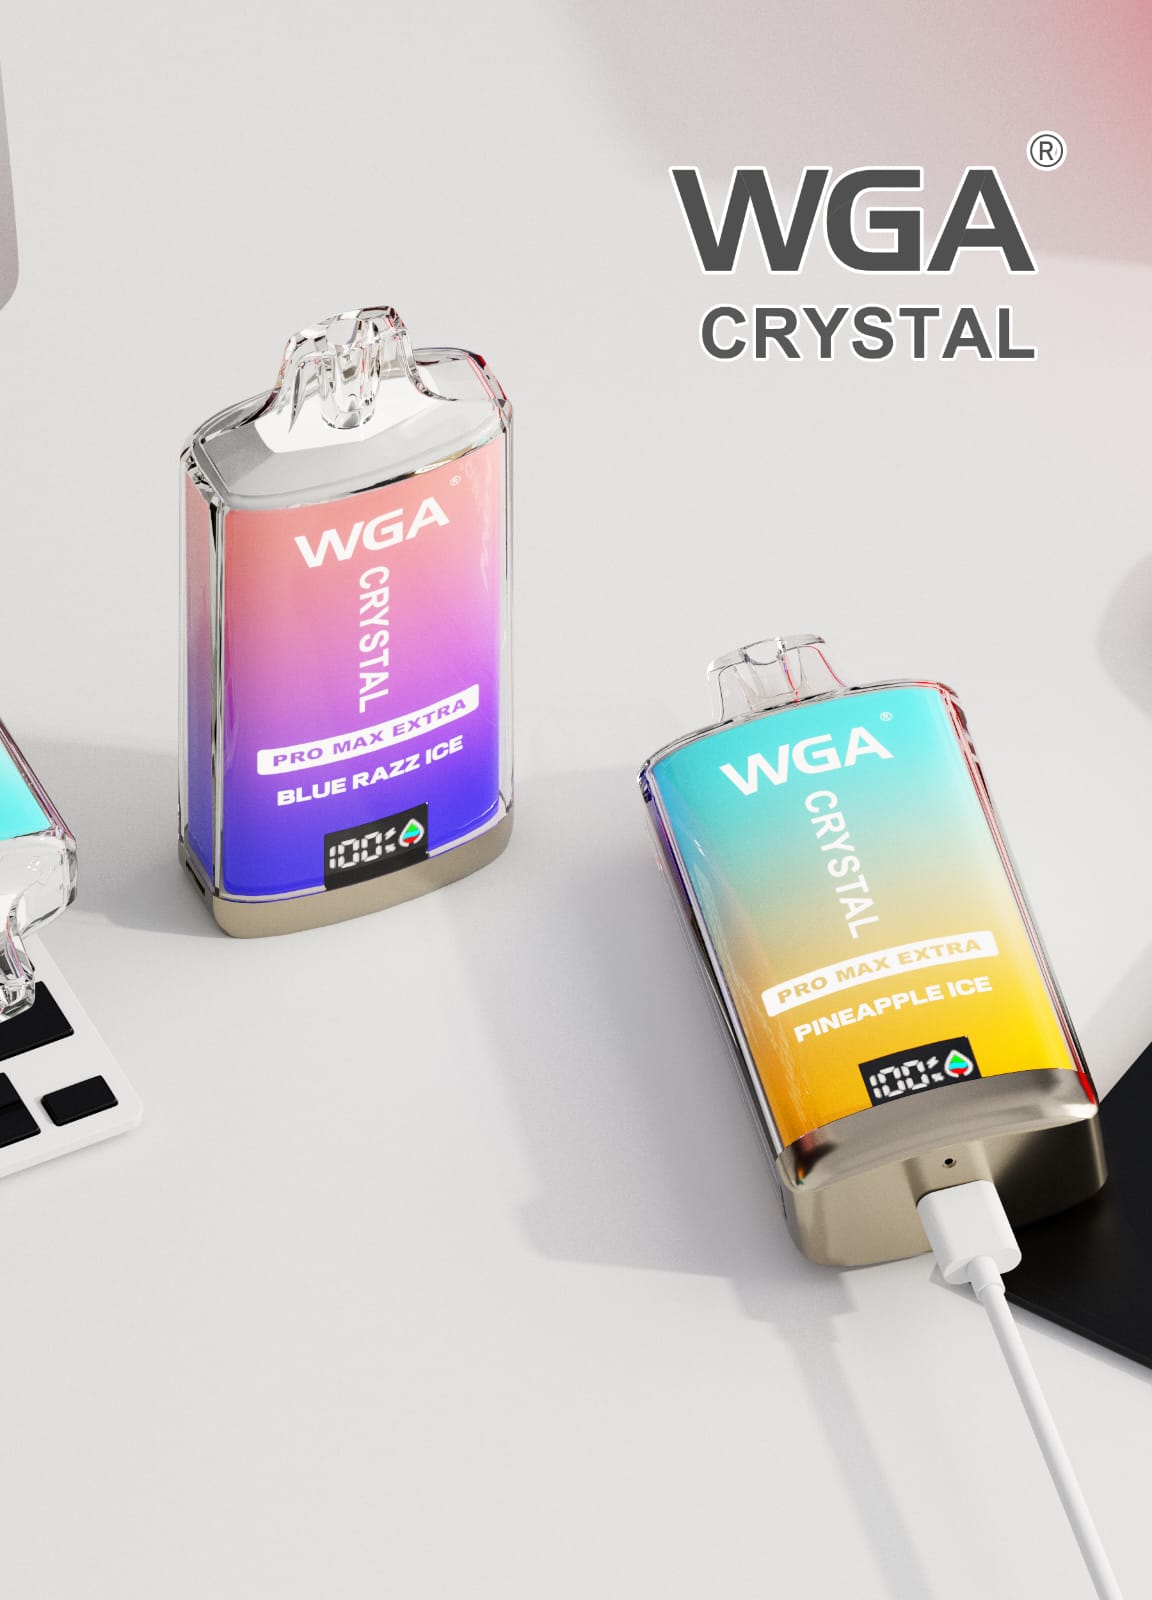 WGA Crystal Pro Max Extra 15k Puffs Disposable Vape Device - Clouds Vapes